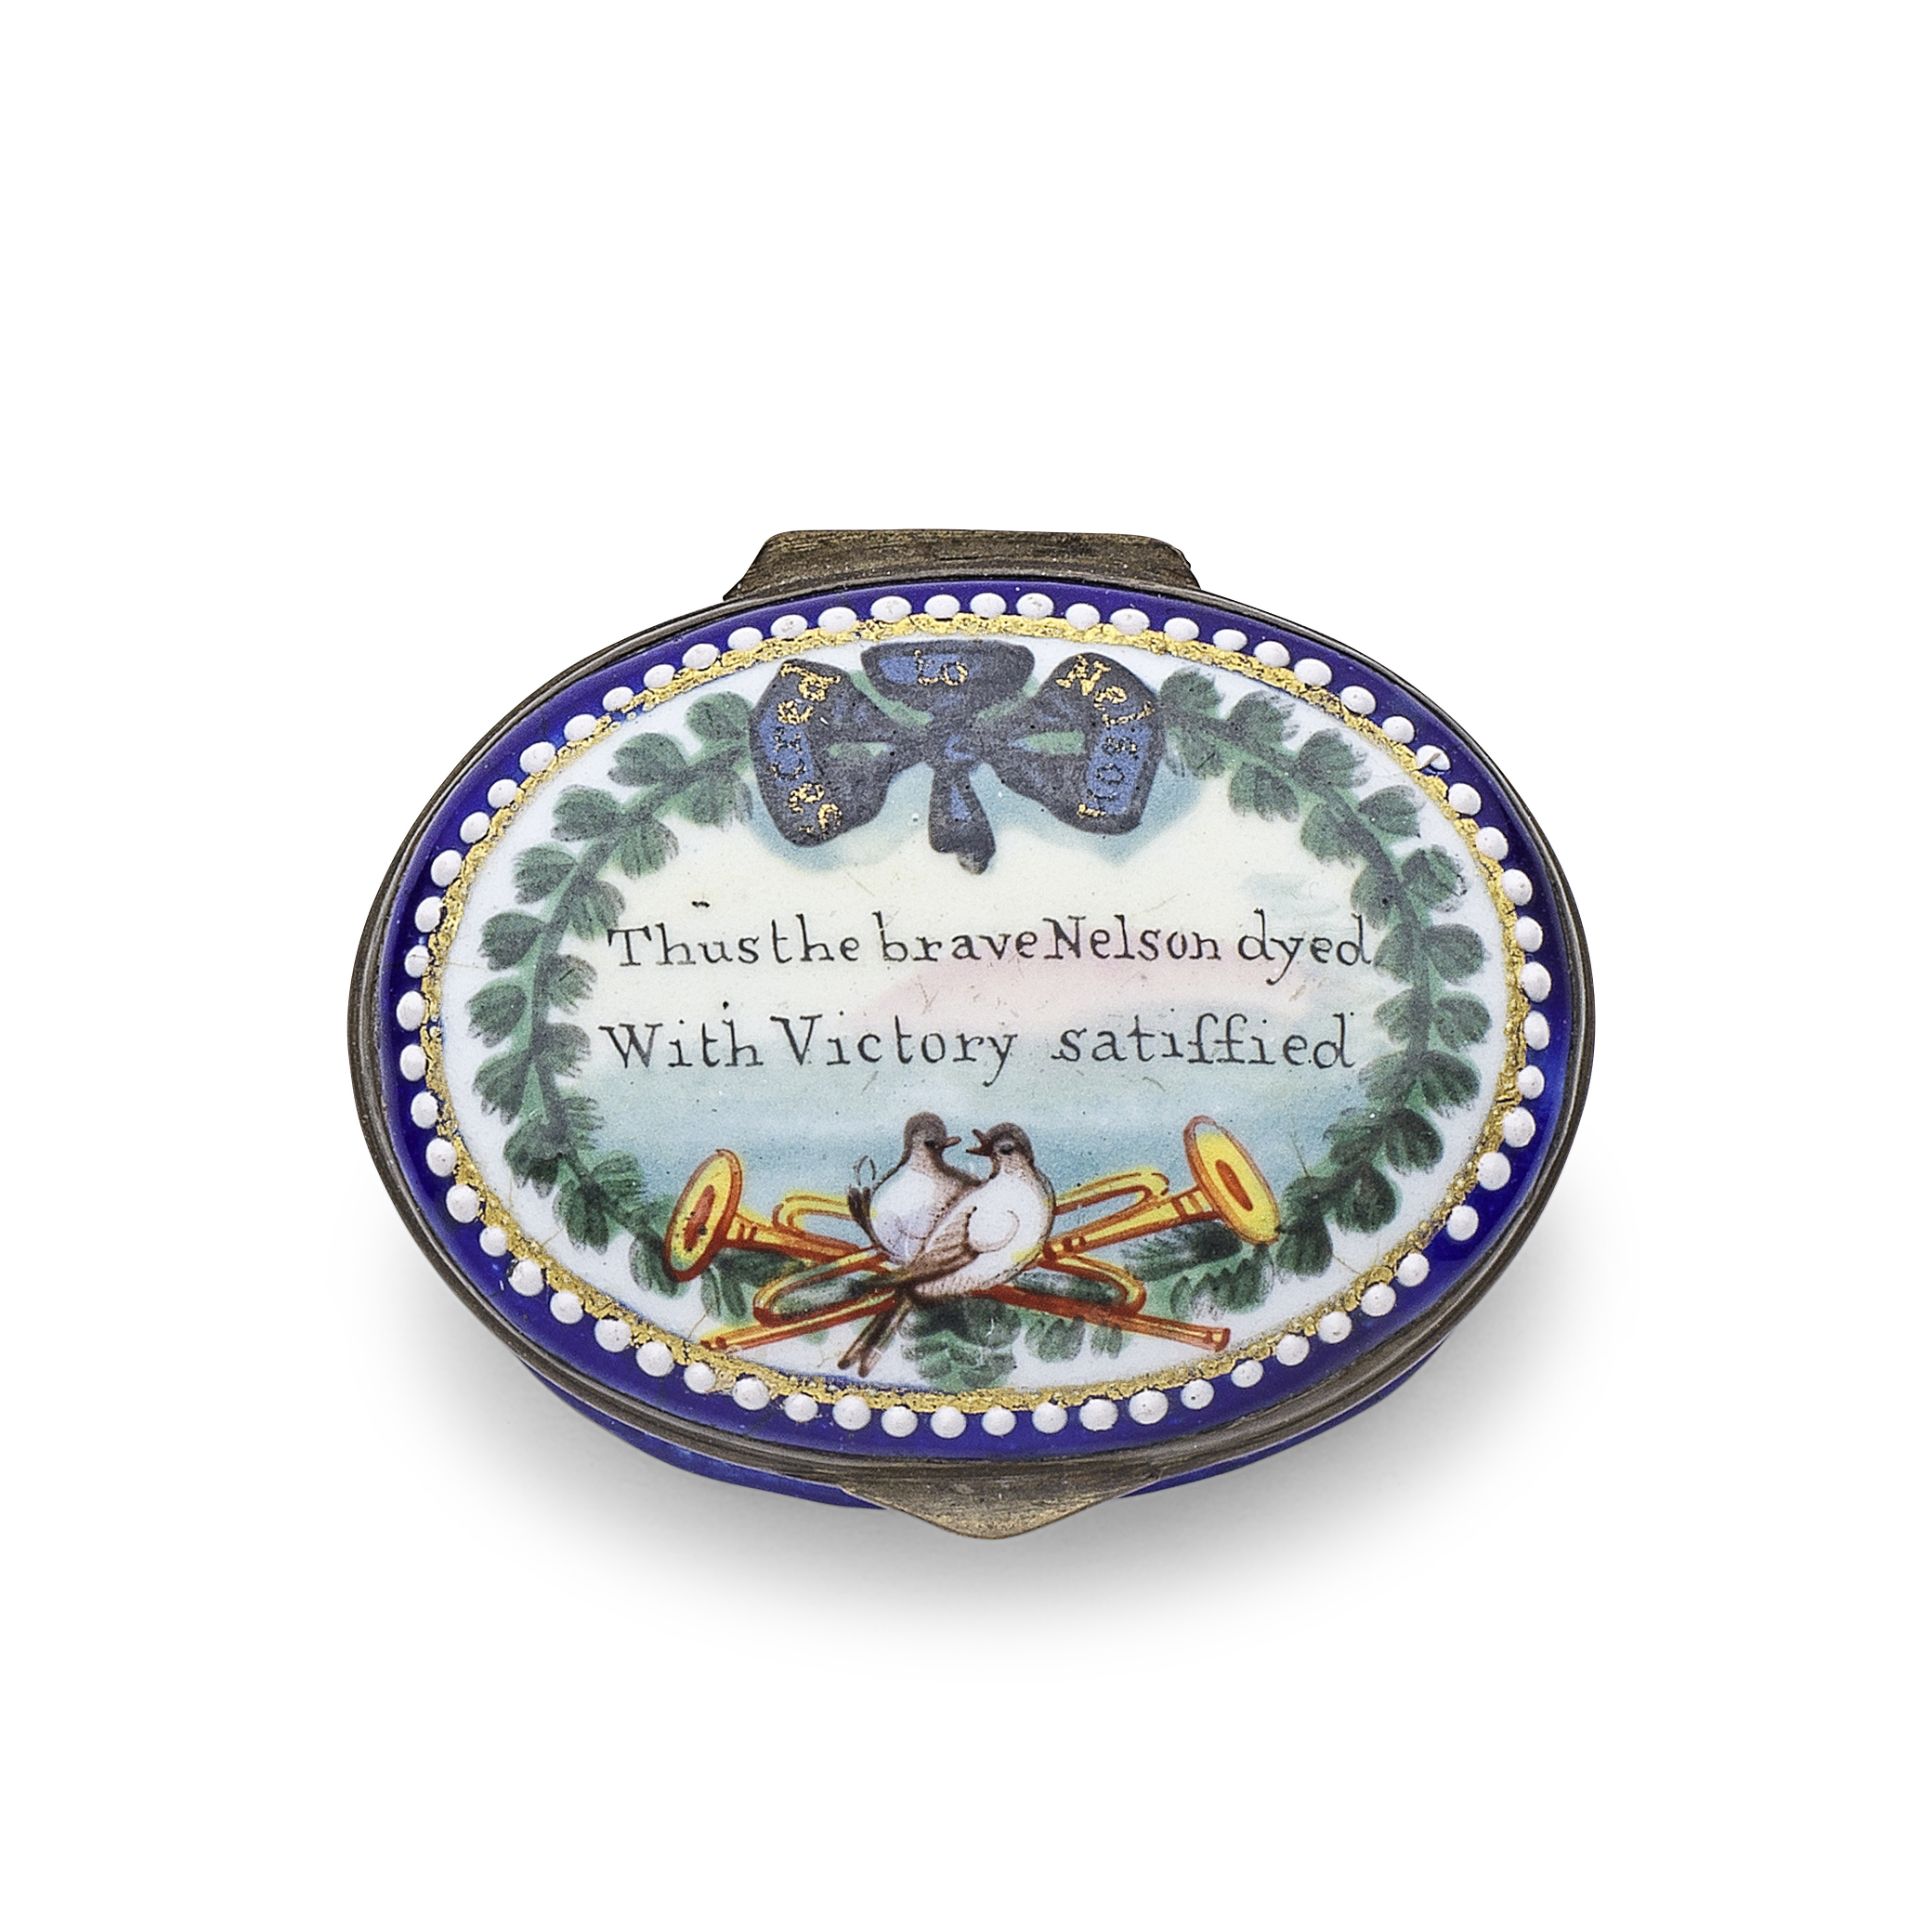 A South Staffordshire enamel patch box, early 19th century